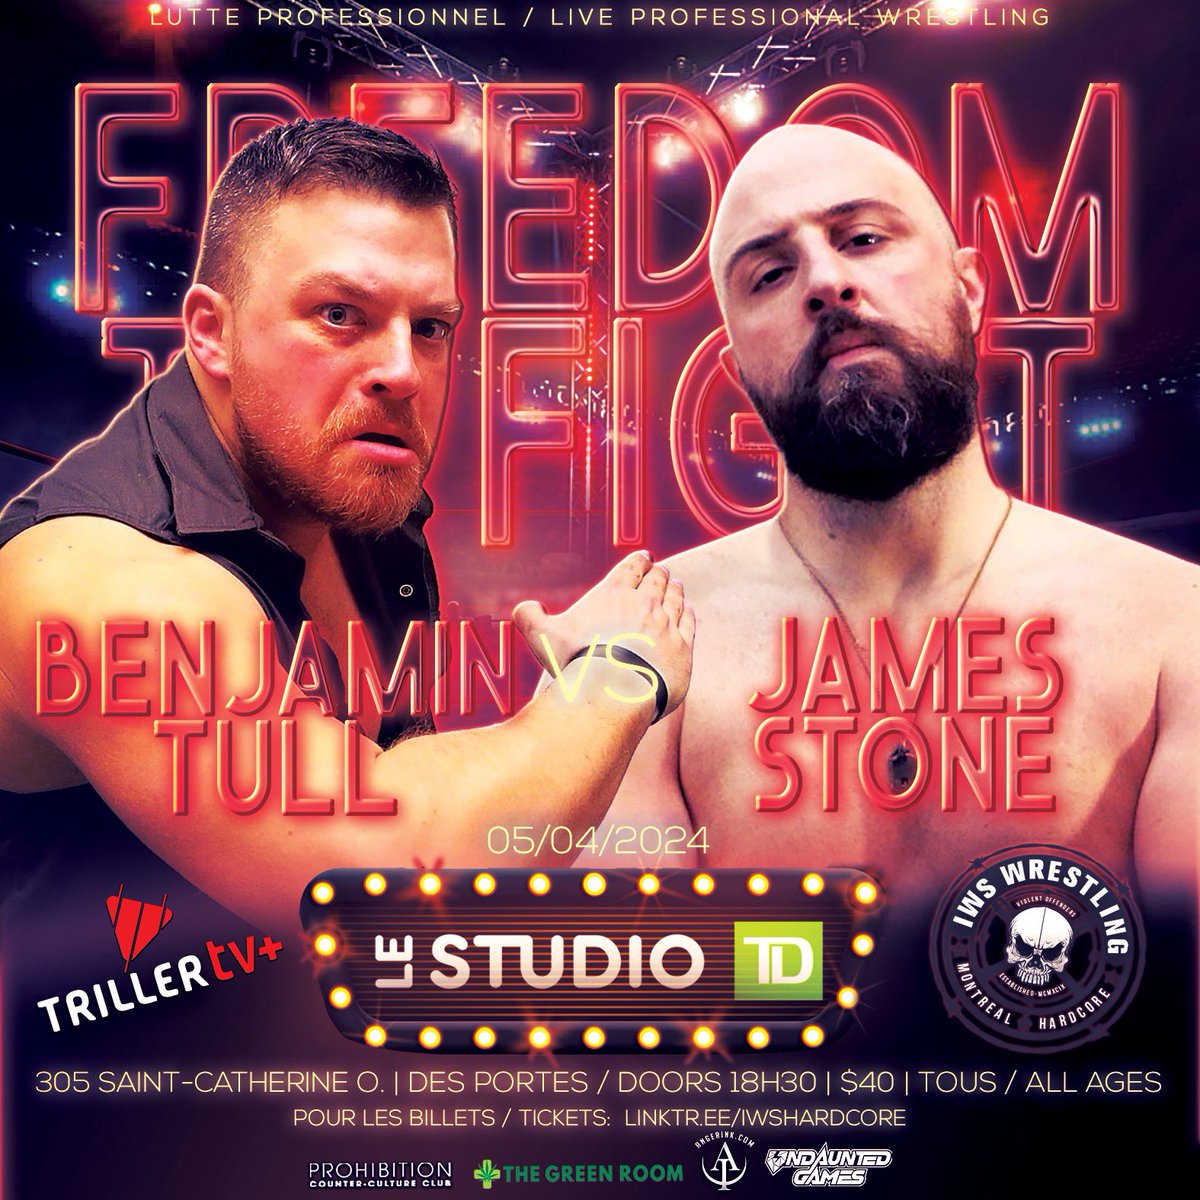 GRUDGE MATCH: James Stone vs Benjamin Tull IWS FREEDOM TO FIGHT 5/4/24 - 40$ - Tous ages/All ages 🎟️: linktr.ee/iwshardcore Billets disponible maintenant! Tickets on sale now! Or watch live/Ecoute en direct: Triller+!